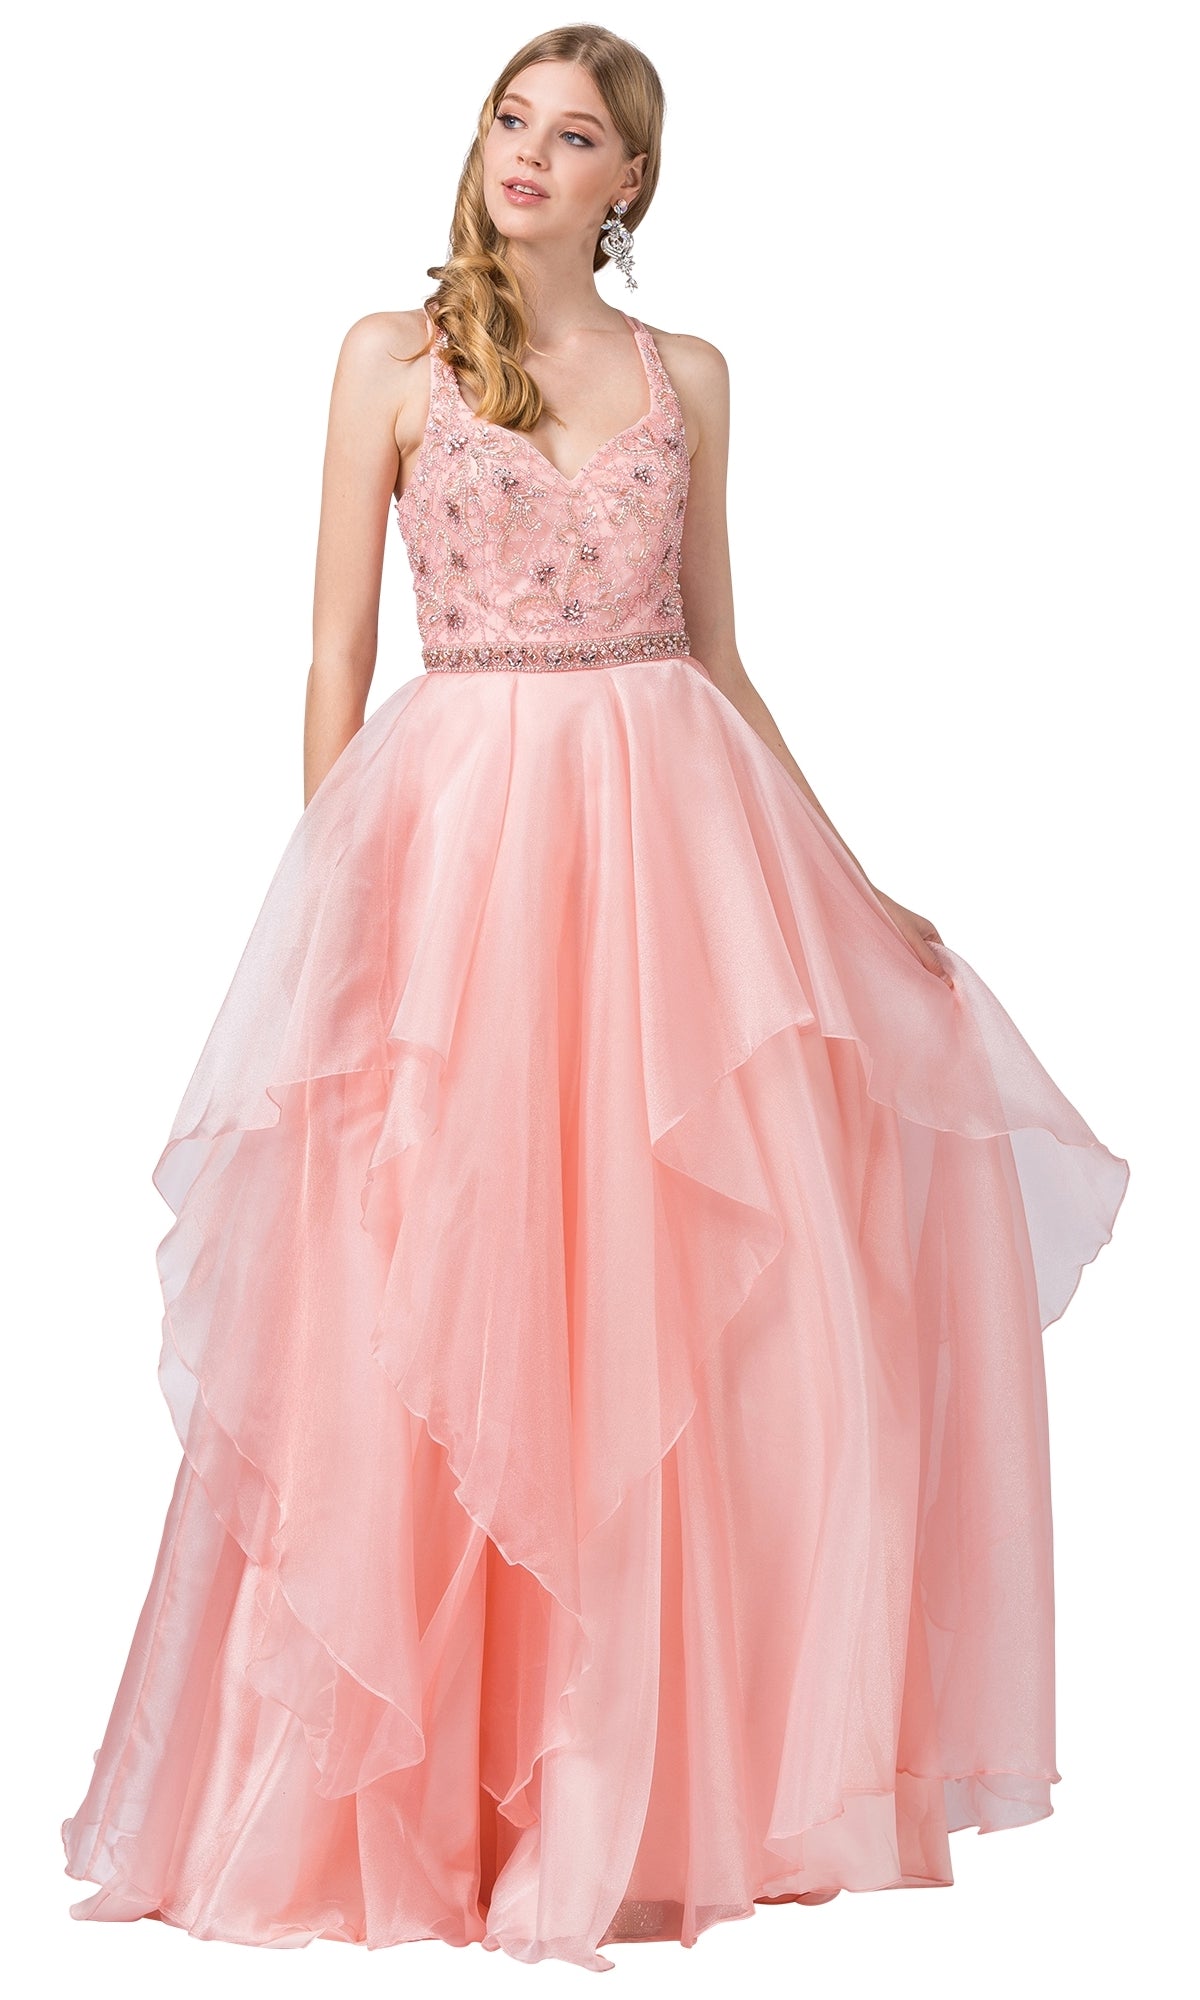 Blush Blush Pink Prom Ball Gown with Beaded Bodice